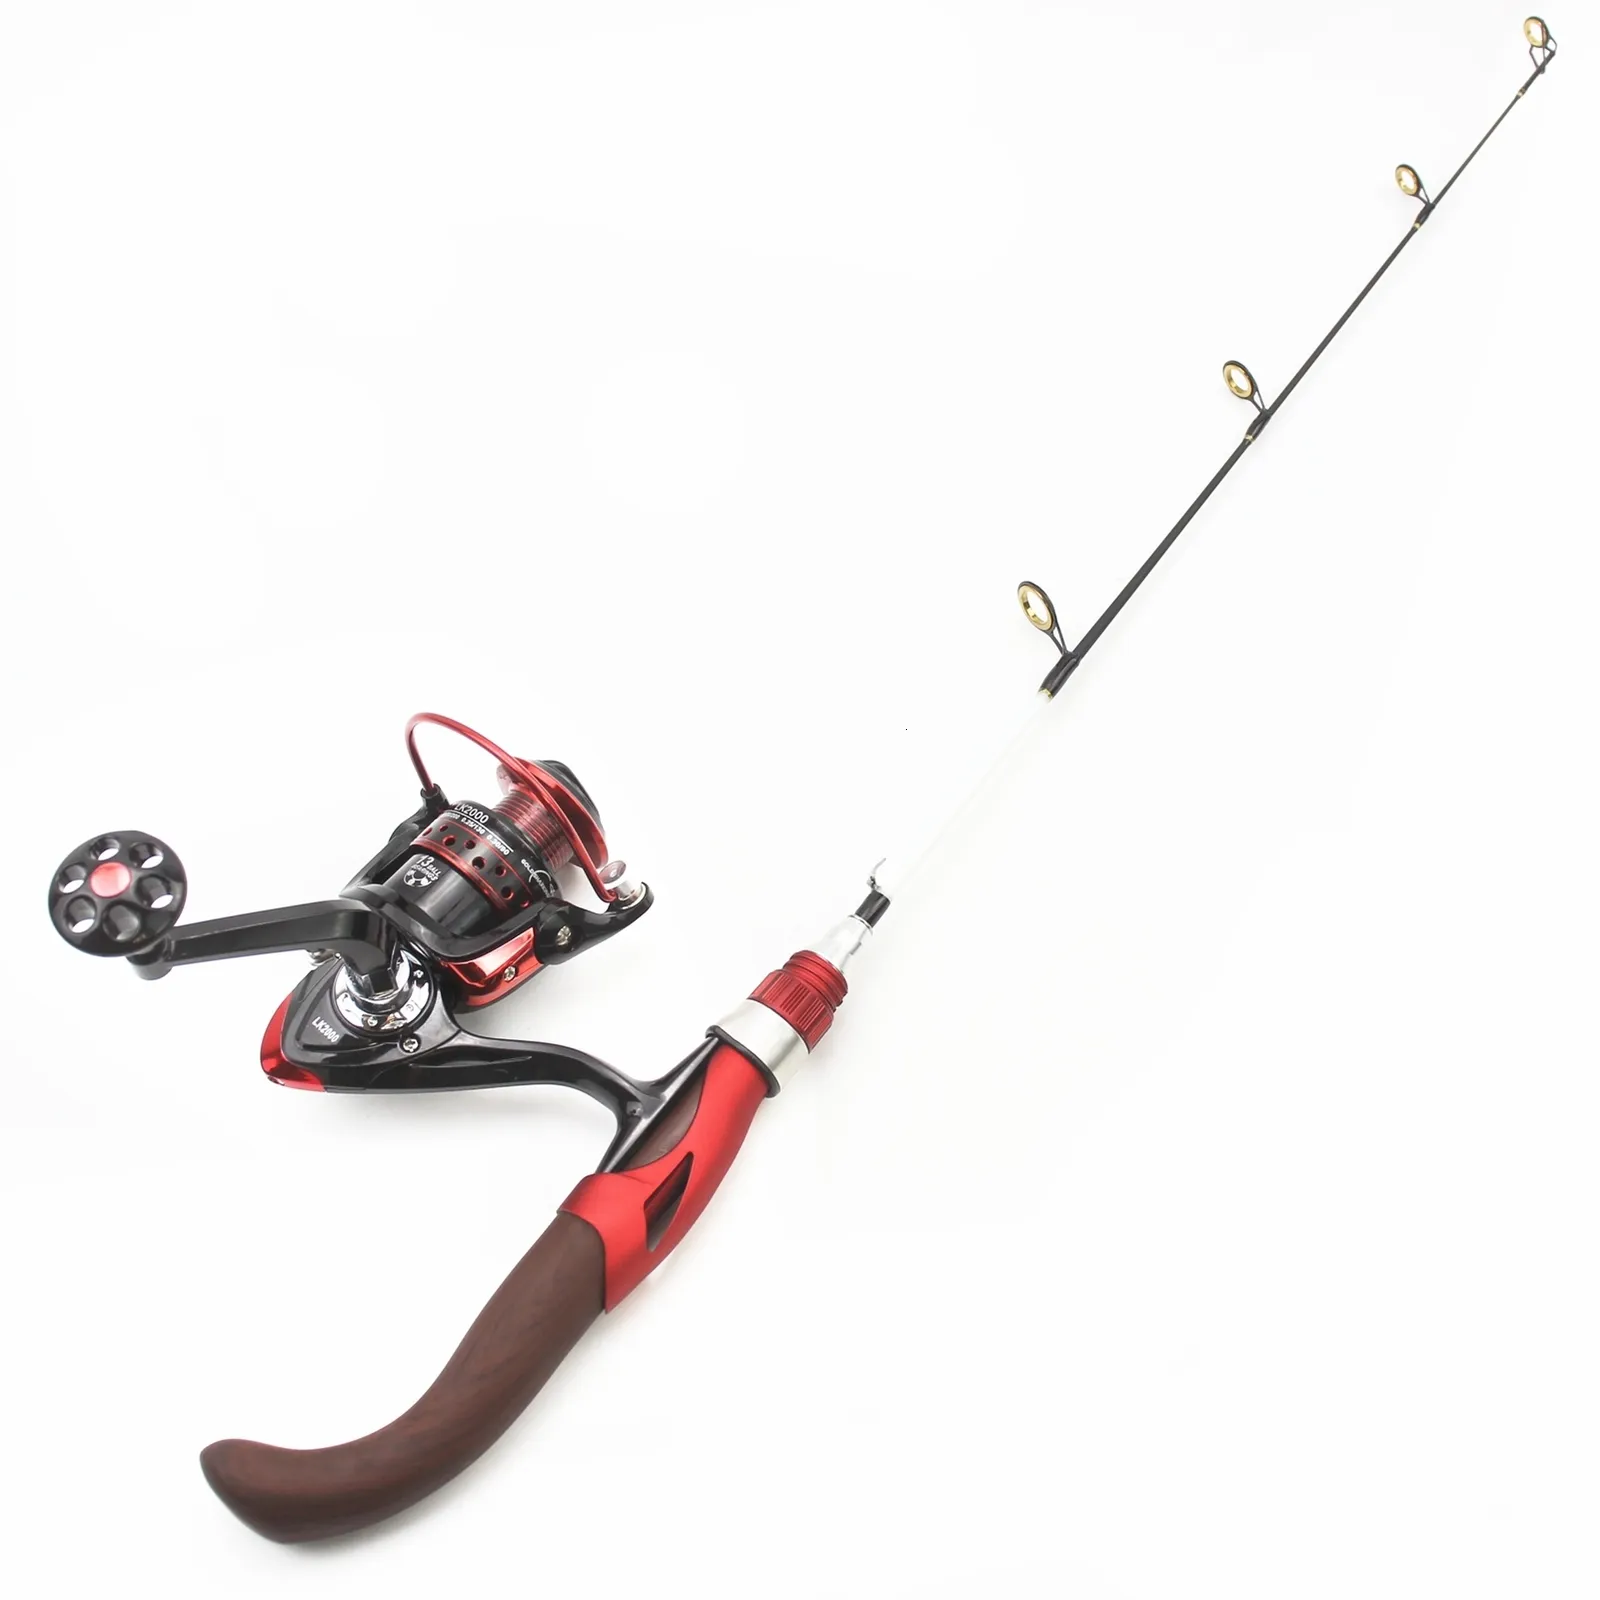 Winter Best Boat Spinning Rod Set 65cm Ice Fishing Reel Combos With Curved  Handle For Pole, Trout, And Spinning Portable And Lightweight 230619 From  Wai05, $13.81